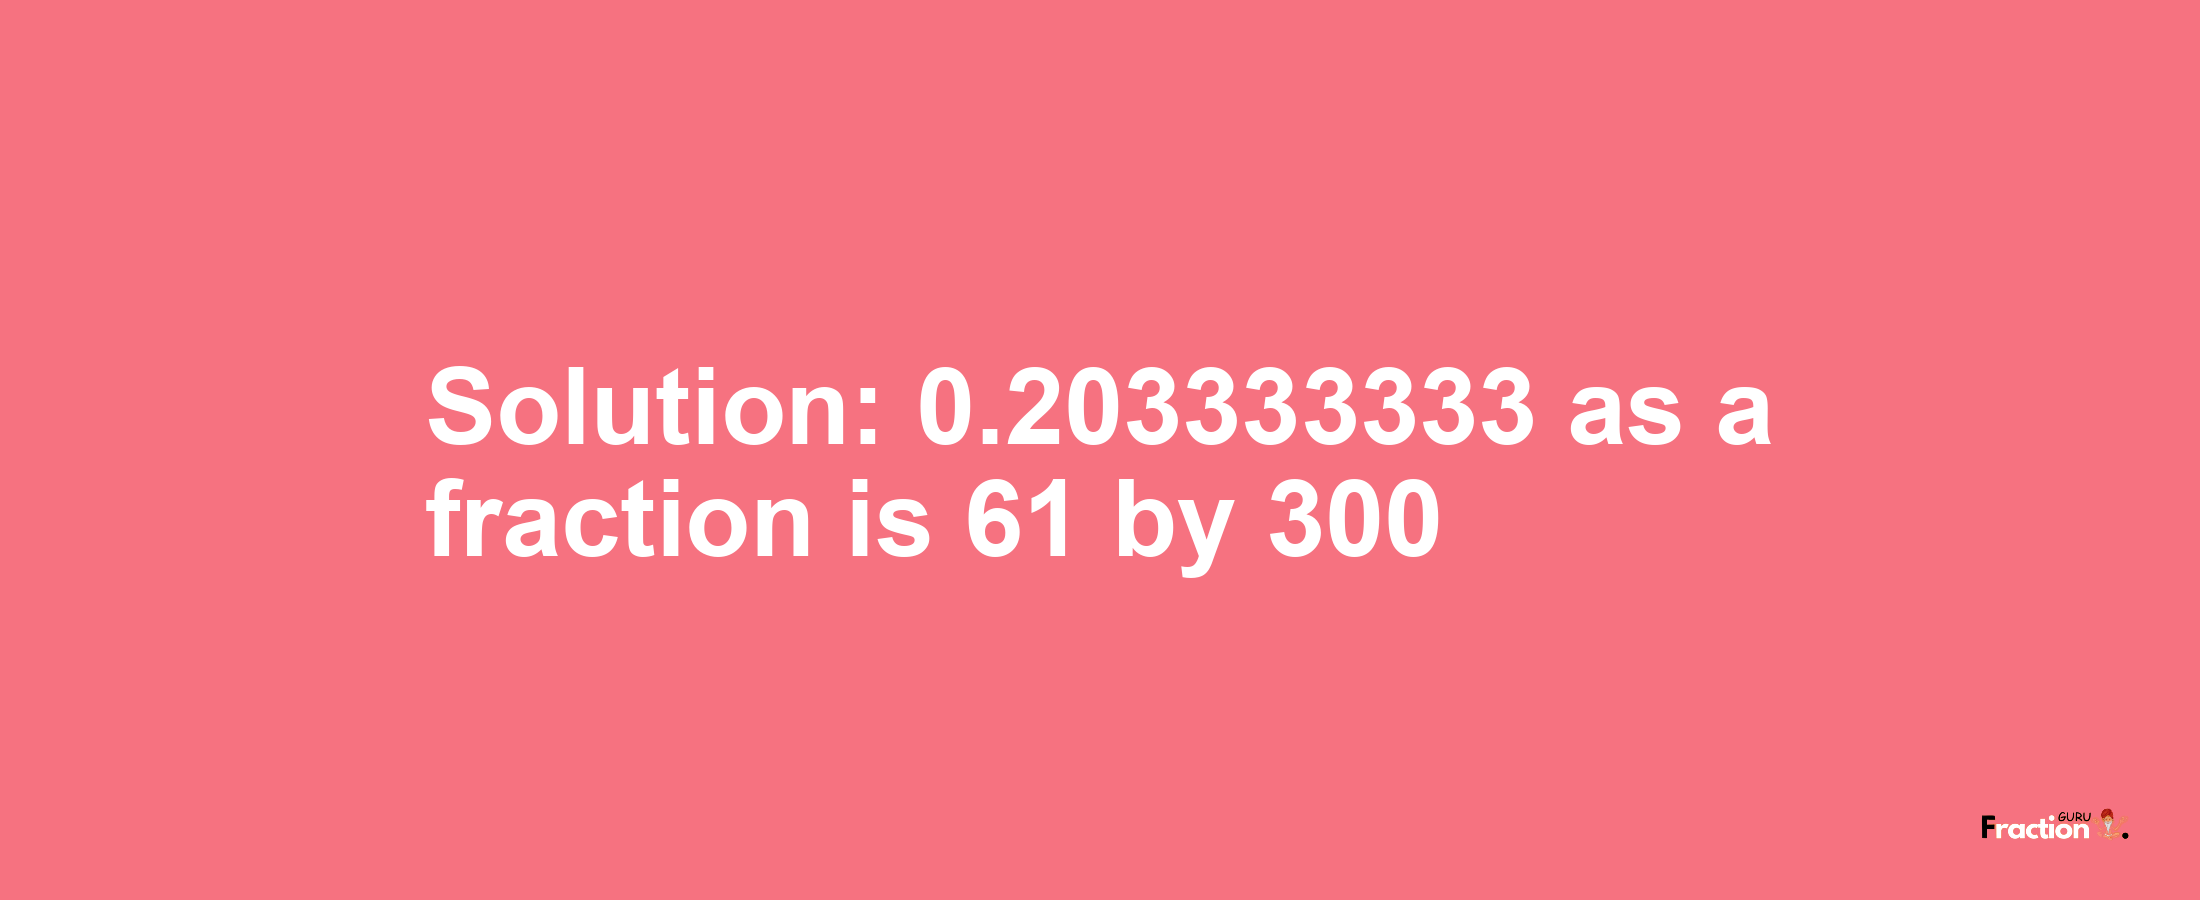 Solution:0.203333333 as a fraction is 61/300